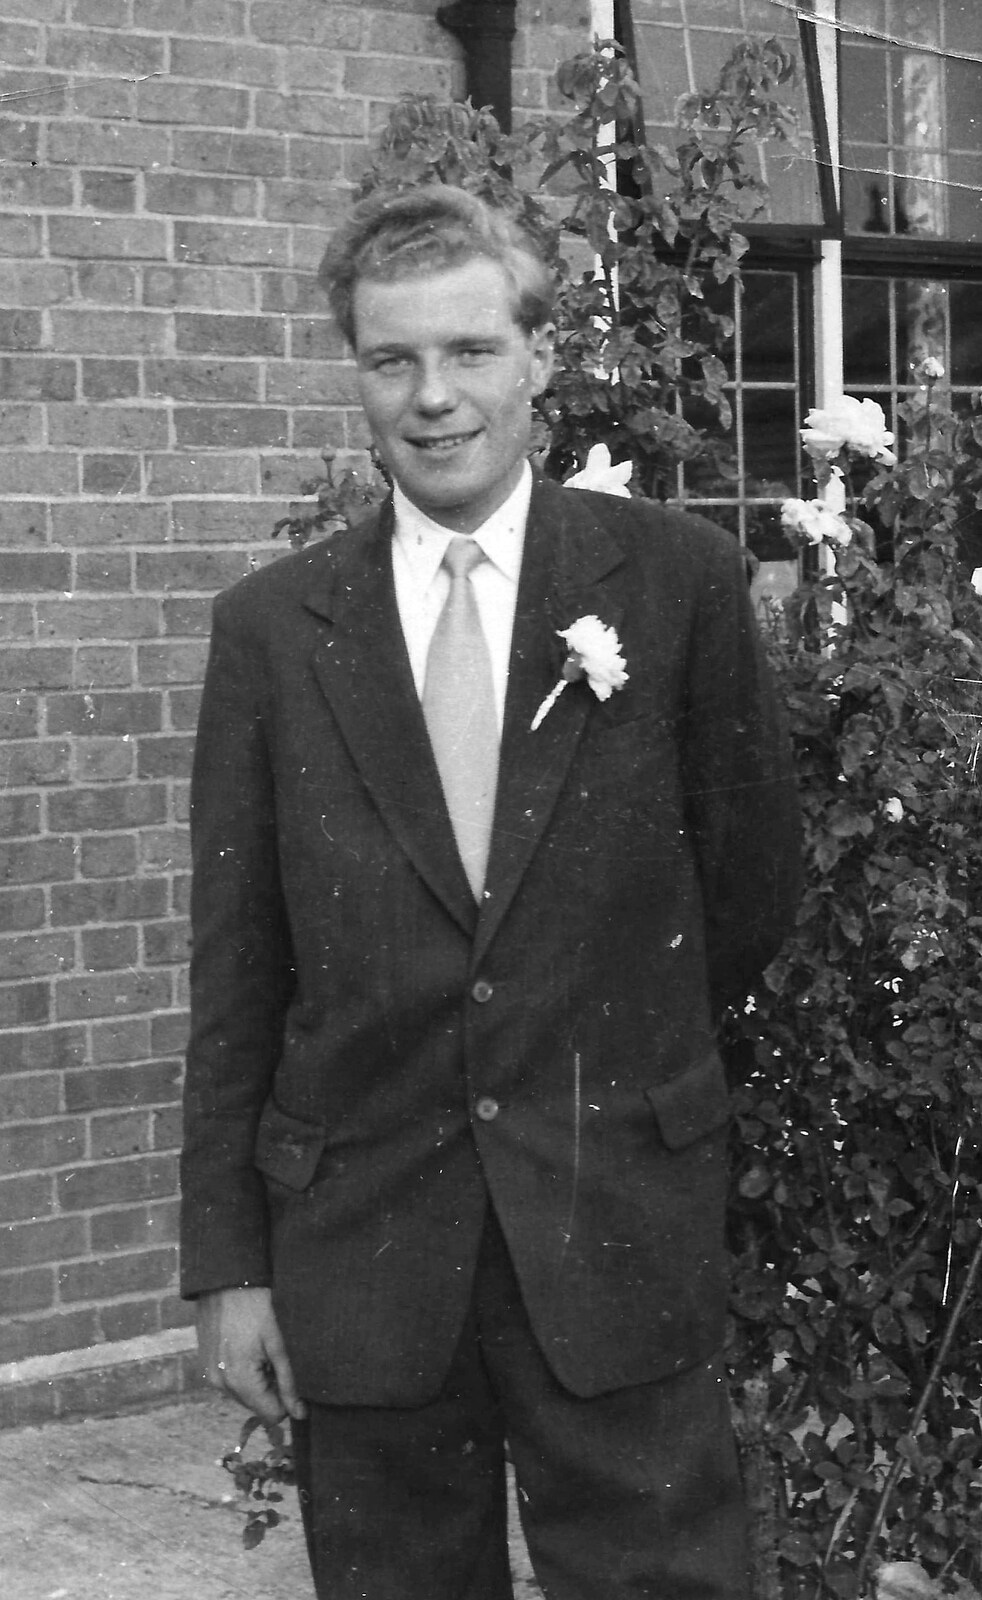 The Grandad Archive, Various Locations - 7th January 2023: Trevor at a wedding, 1958?